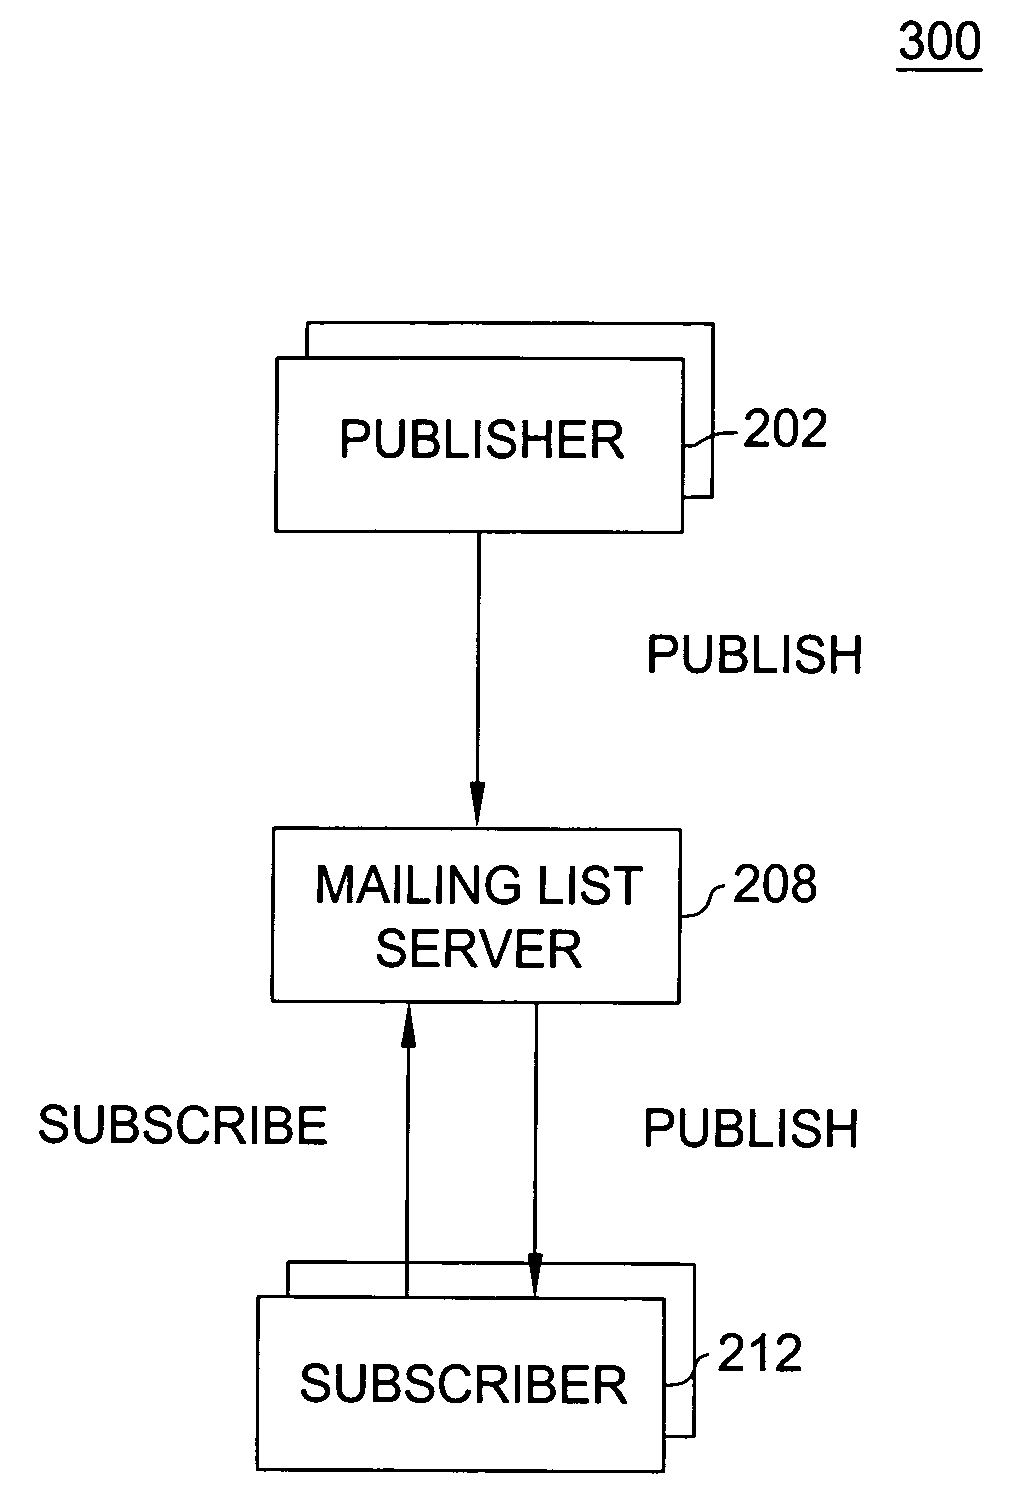 E-mail attachment as one-time clickable link